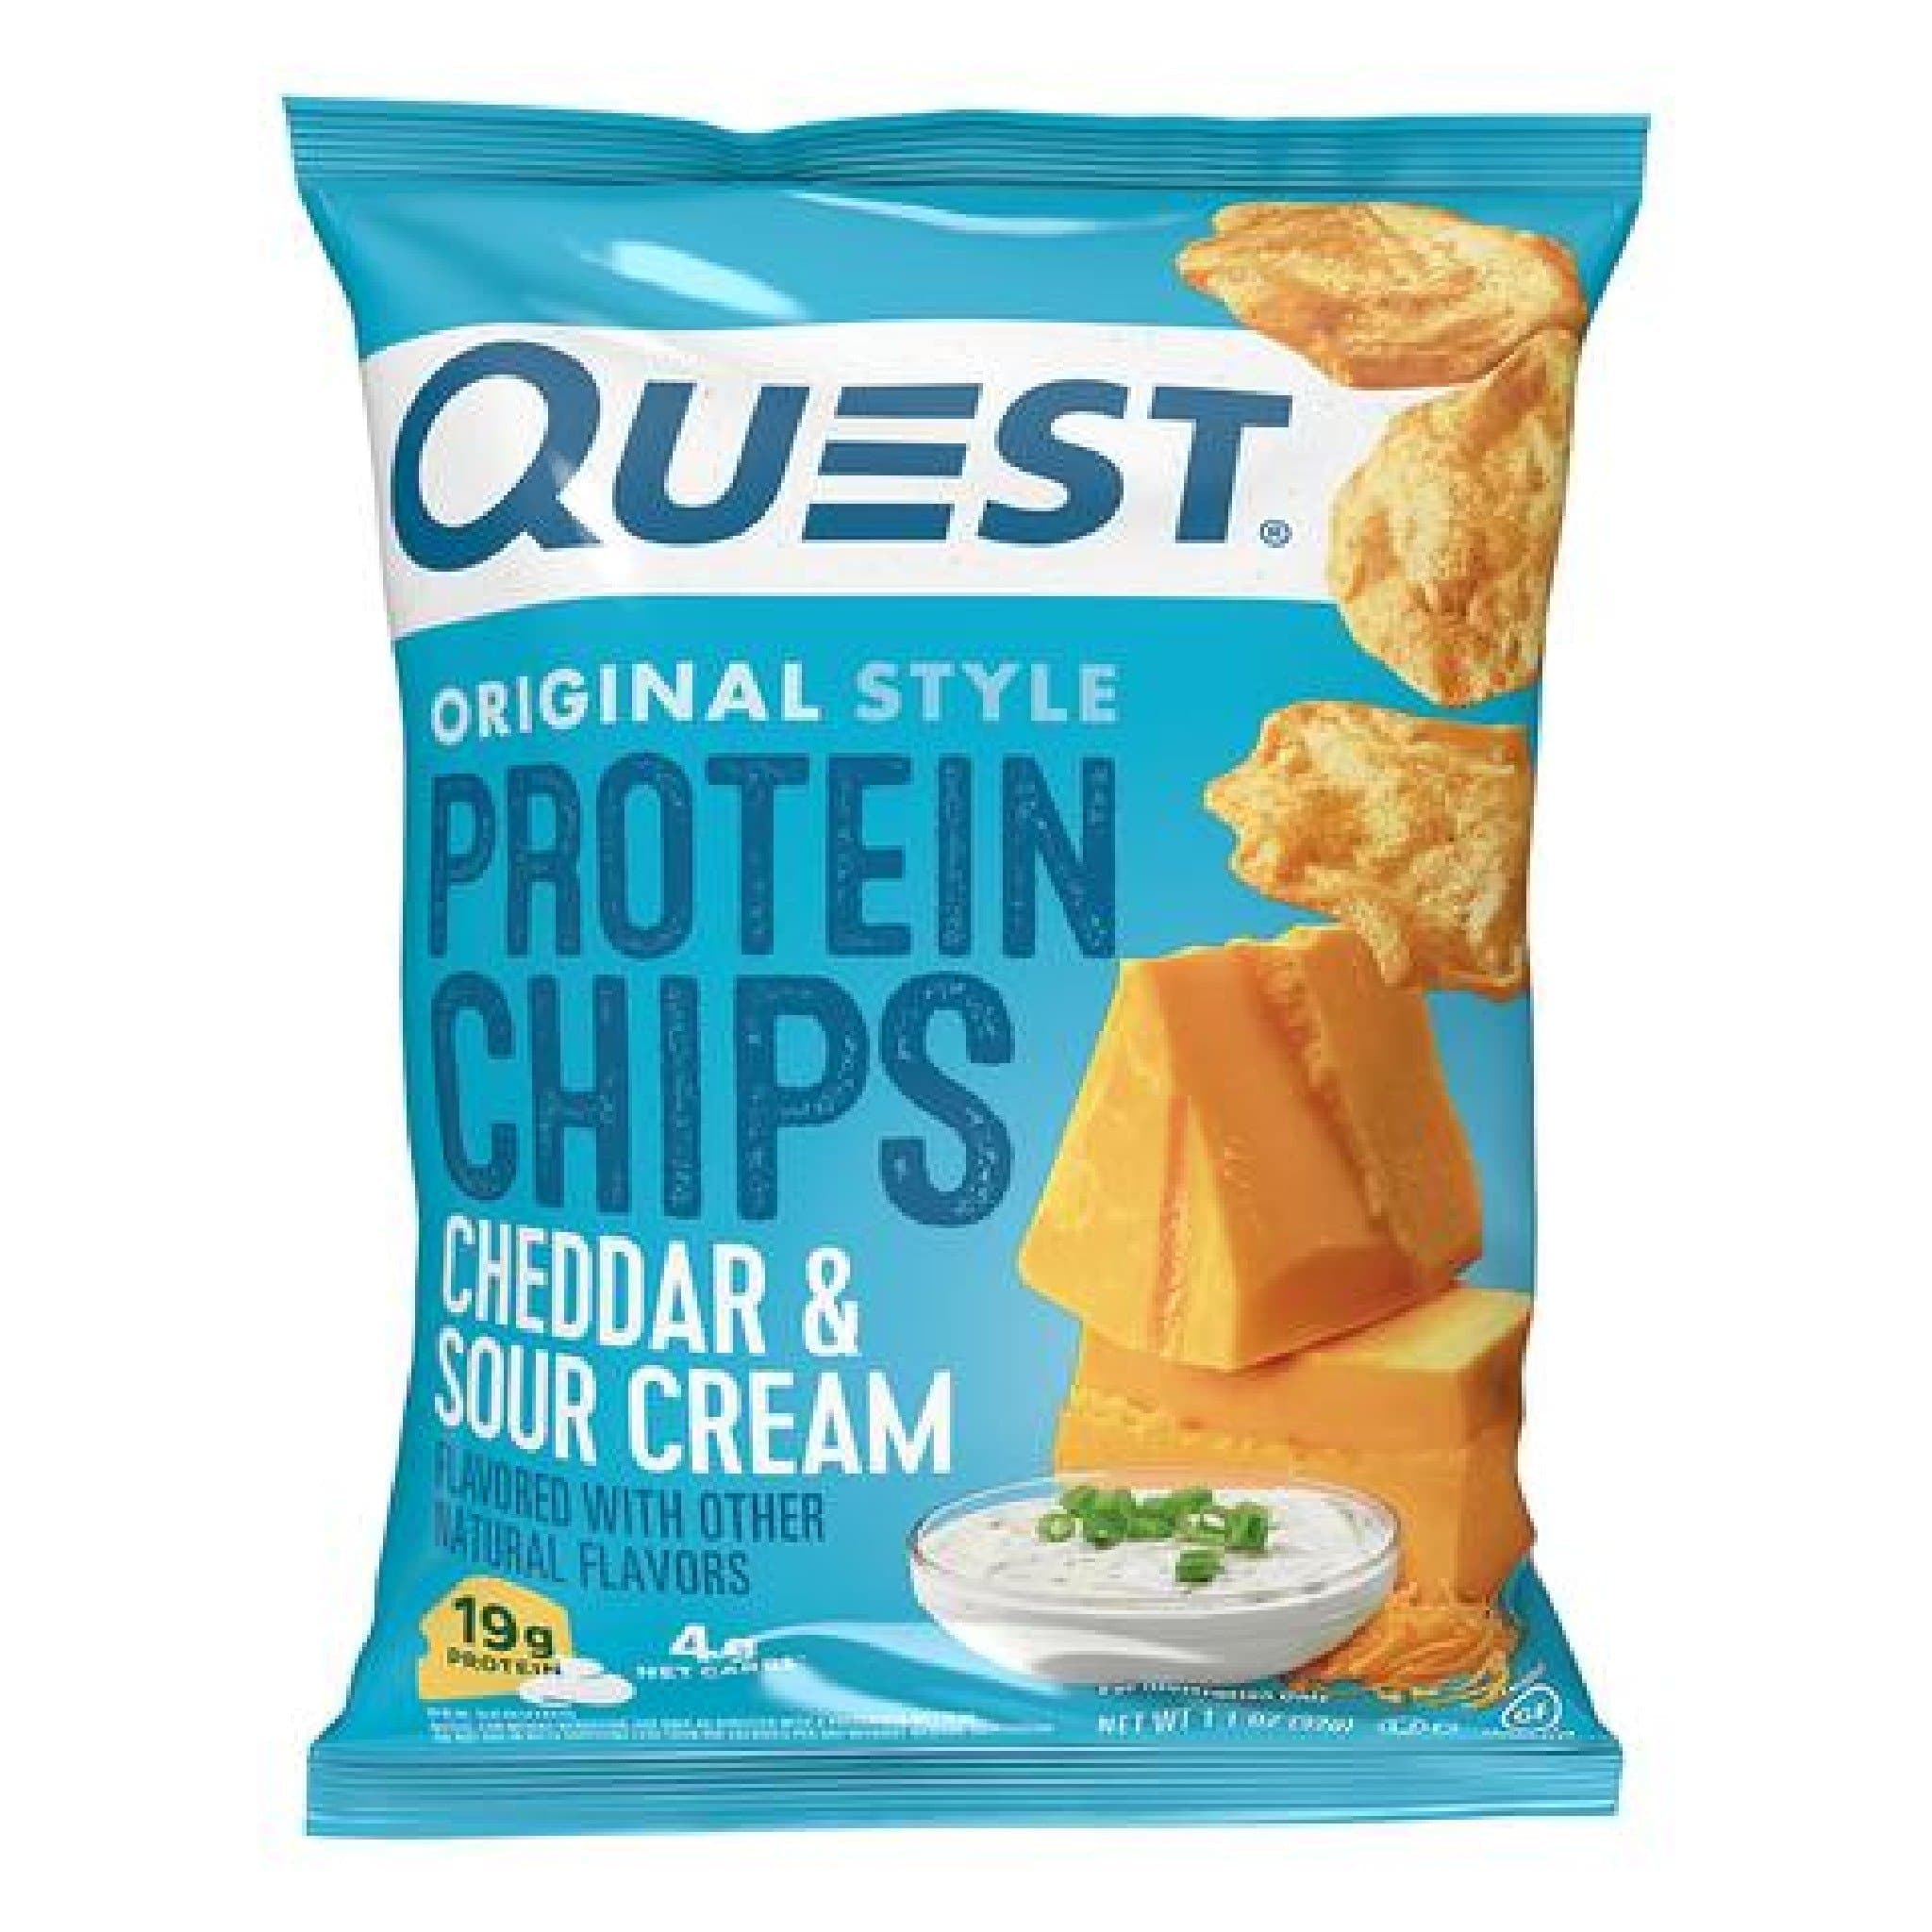 Quest Chips BBQ